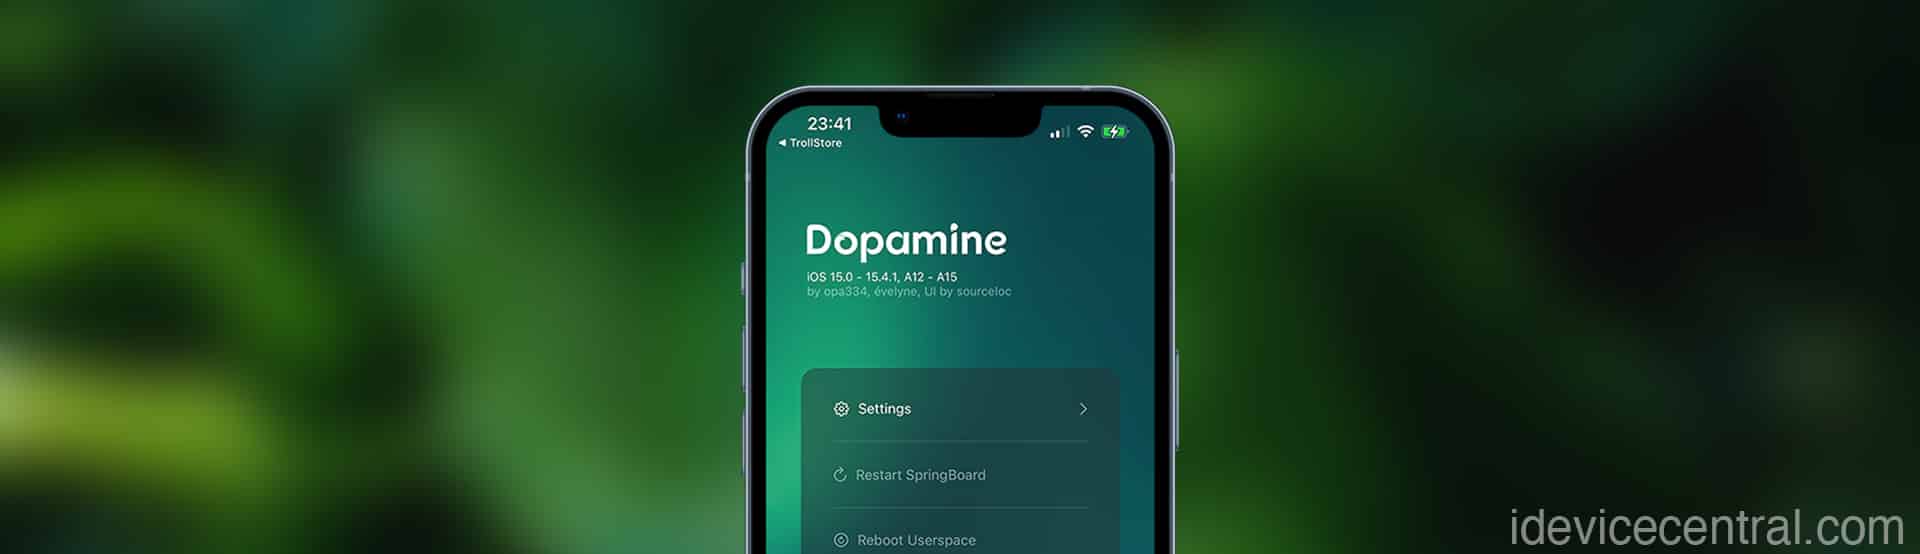 Dopamine Jailbreak (Fugu15 Max) Release Is Coming Soon for iOS 15.0 – 15.4.1 A12+